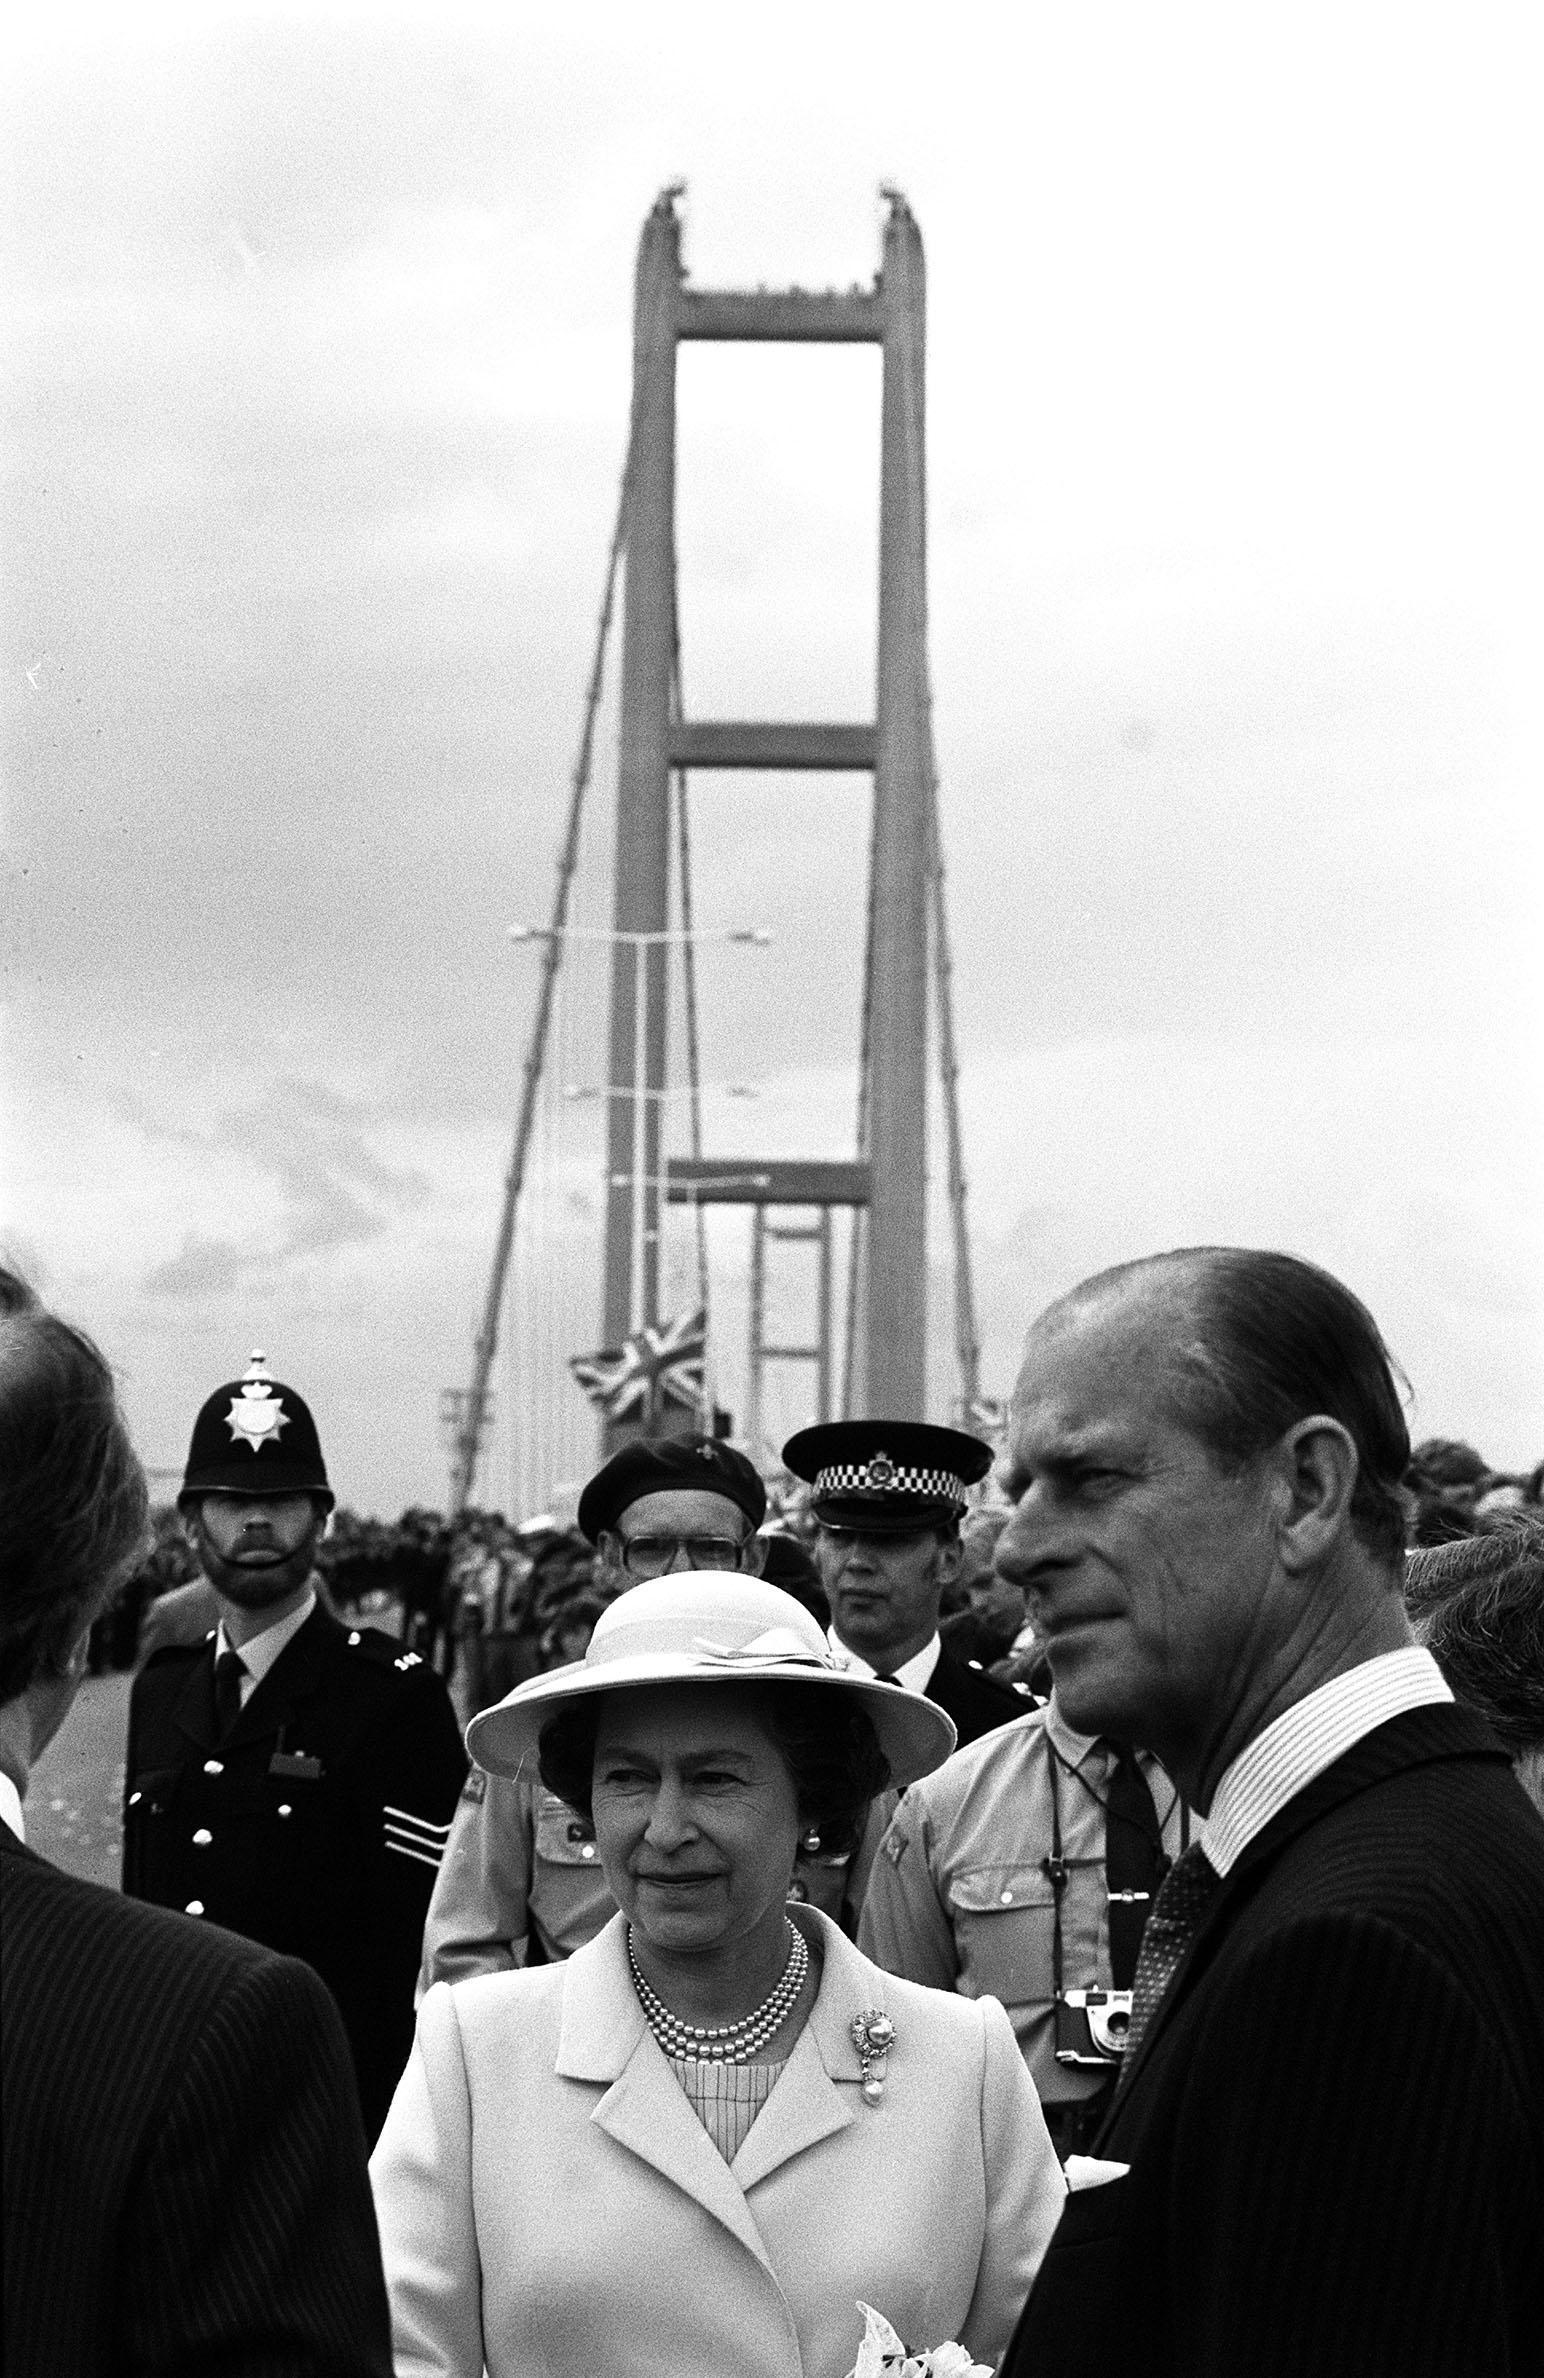 The Queen and the Duke of Edinburgh visit The Humber Bridge, 17 July 1981 © PA Images / Alamy Stock Photo